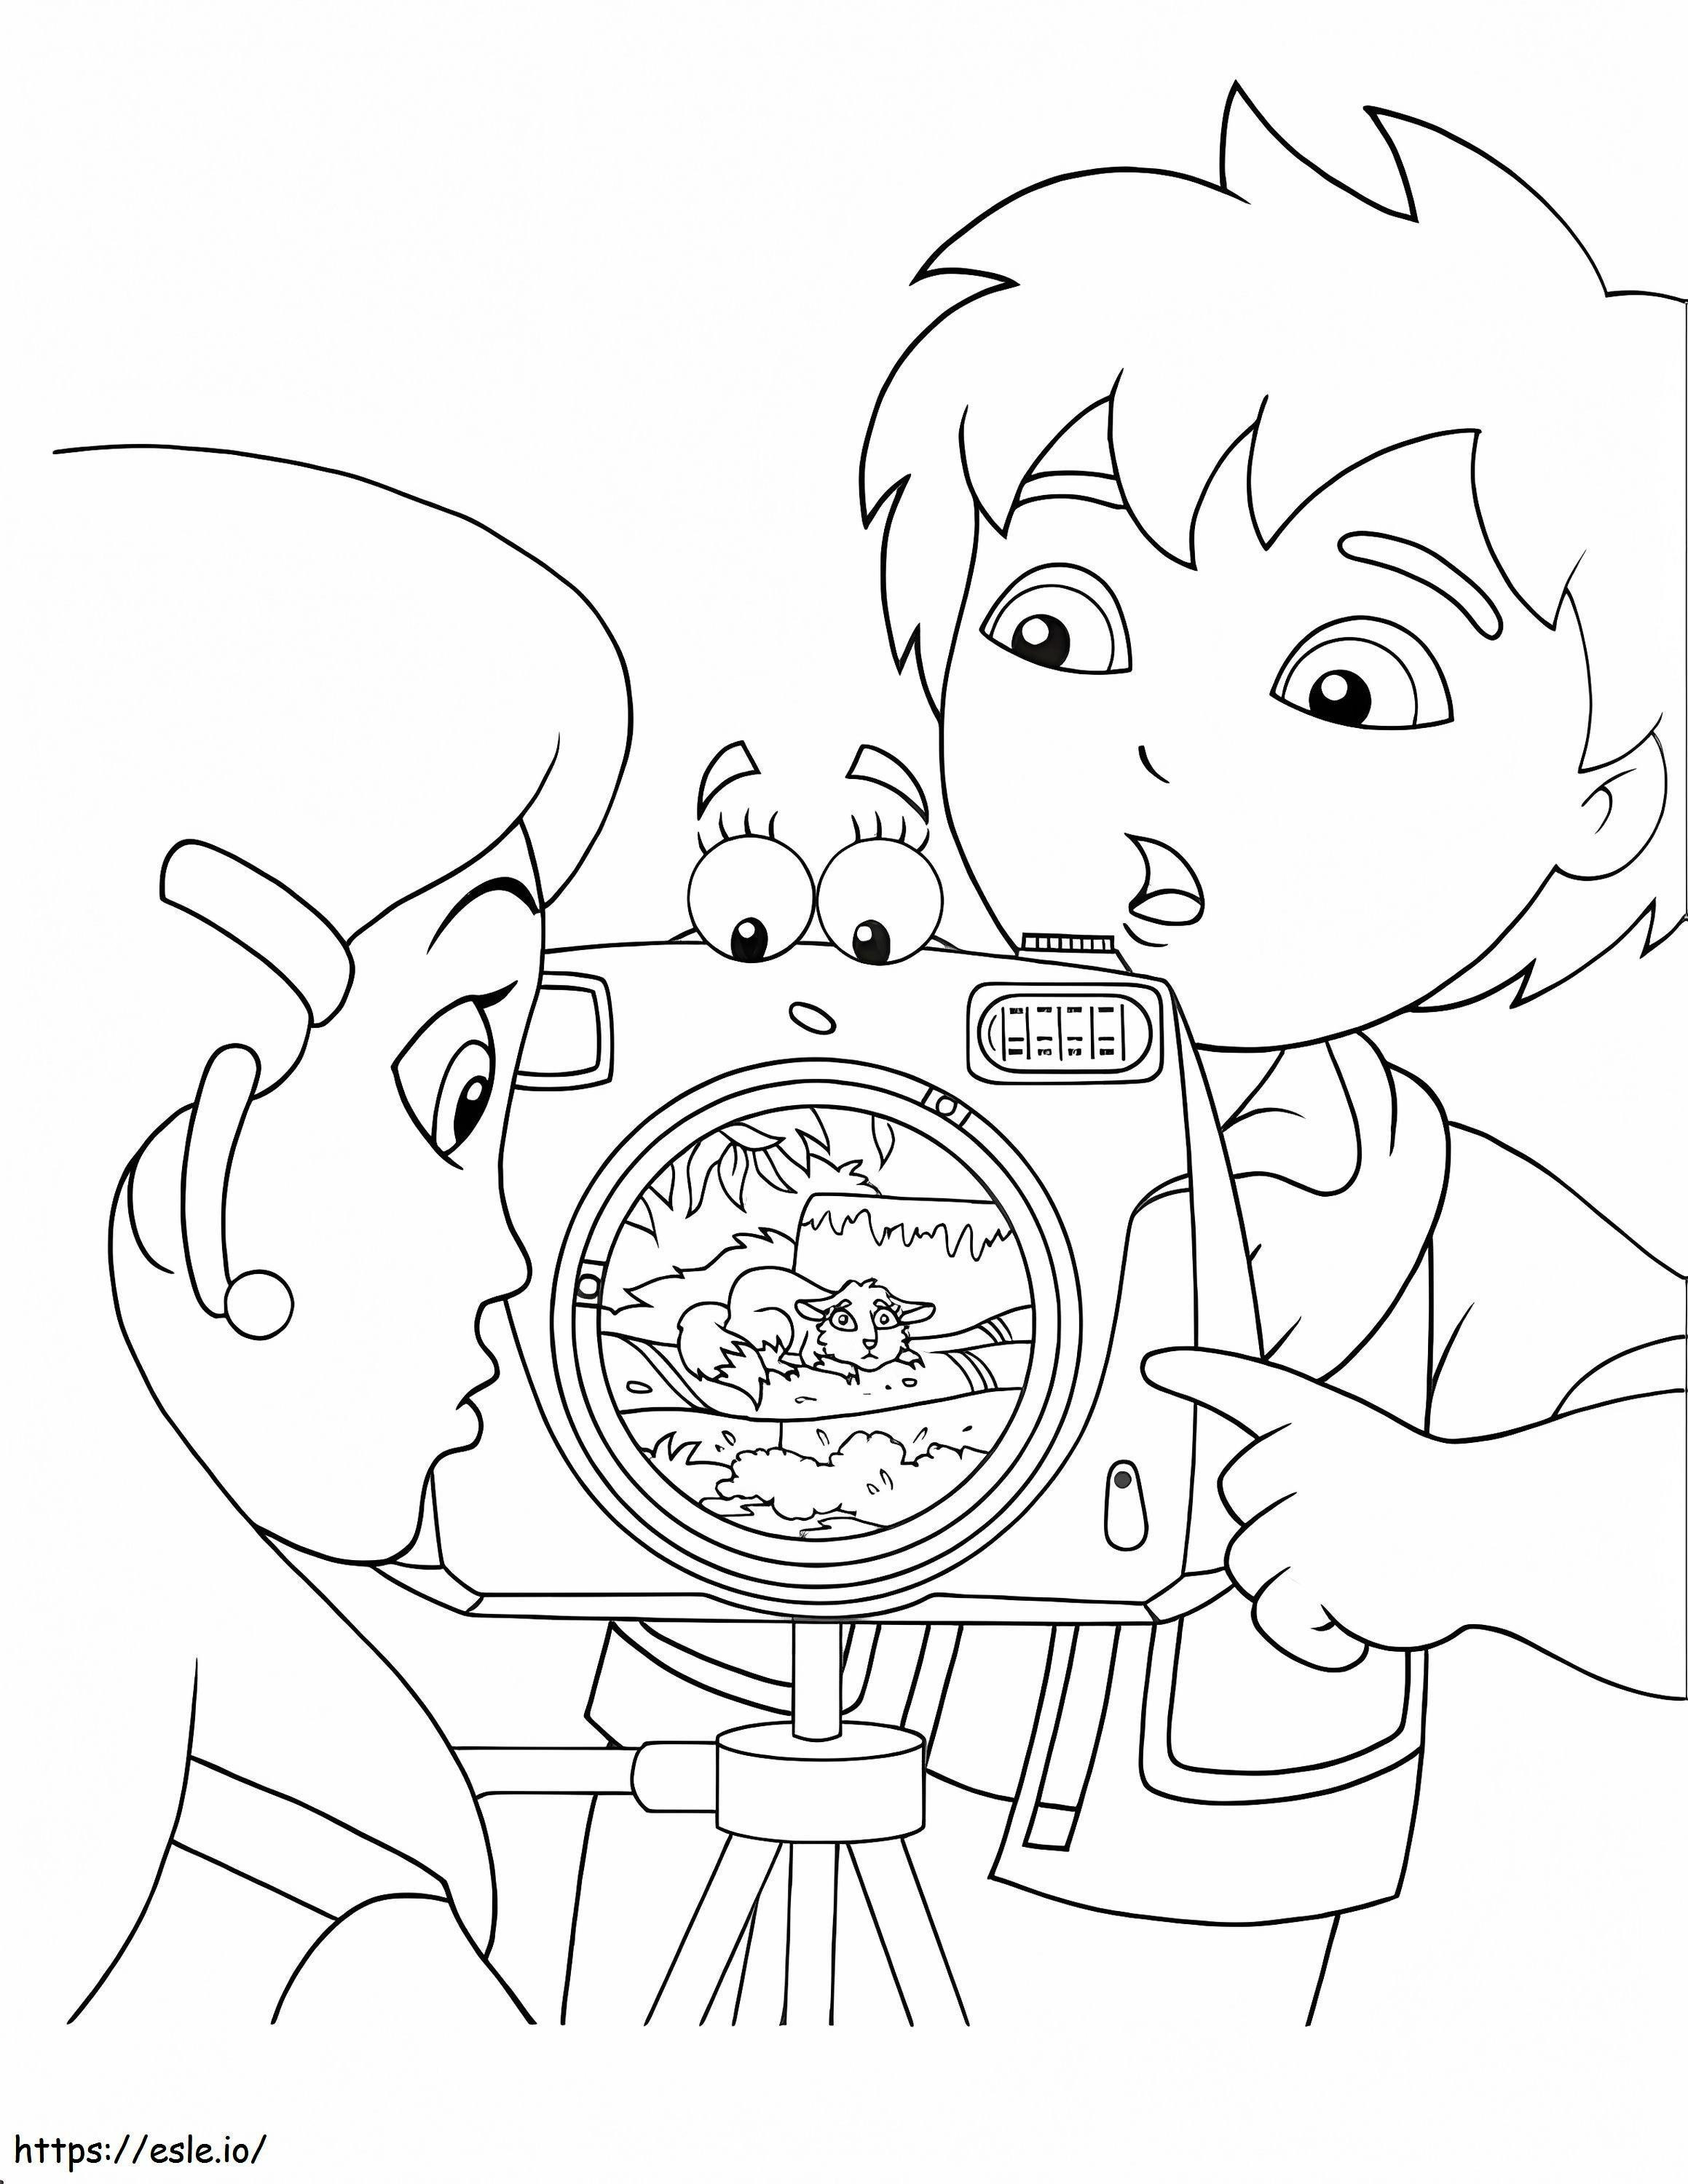 Diego Awesome coloring page